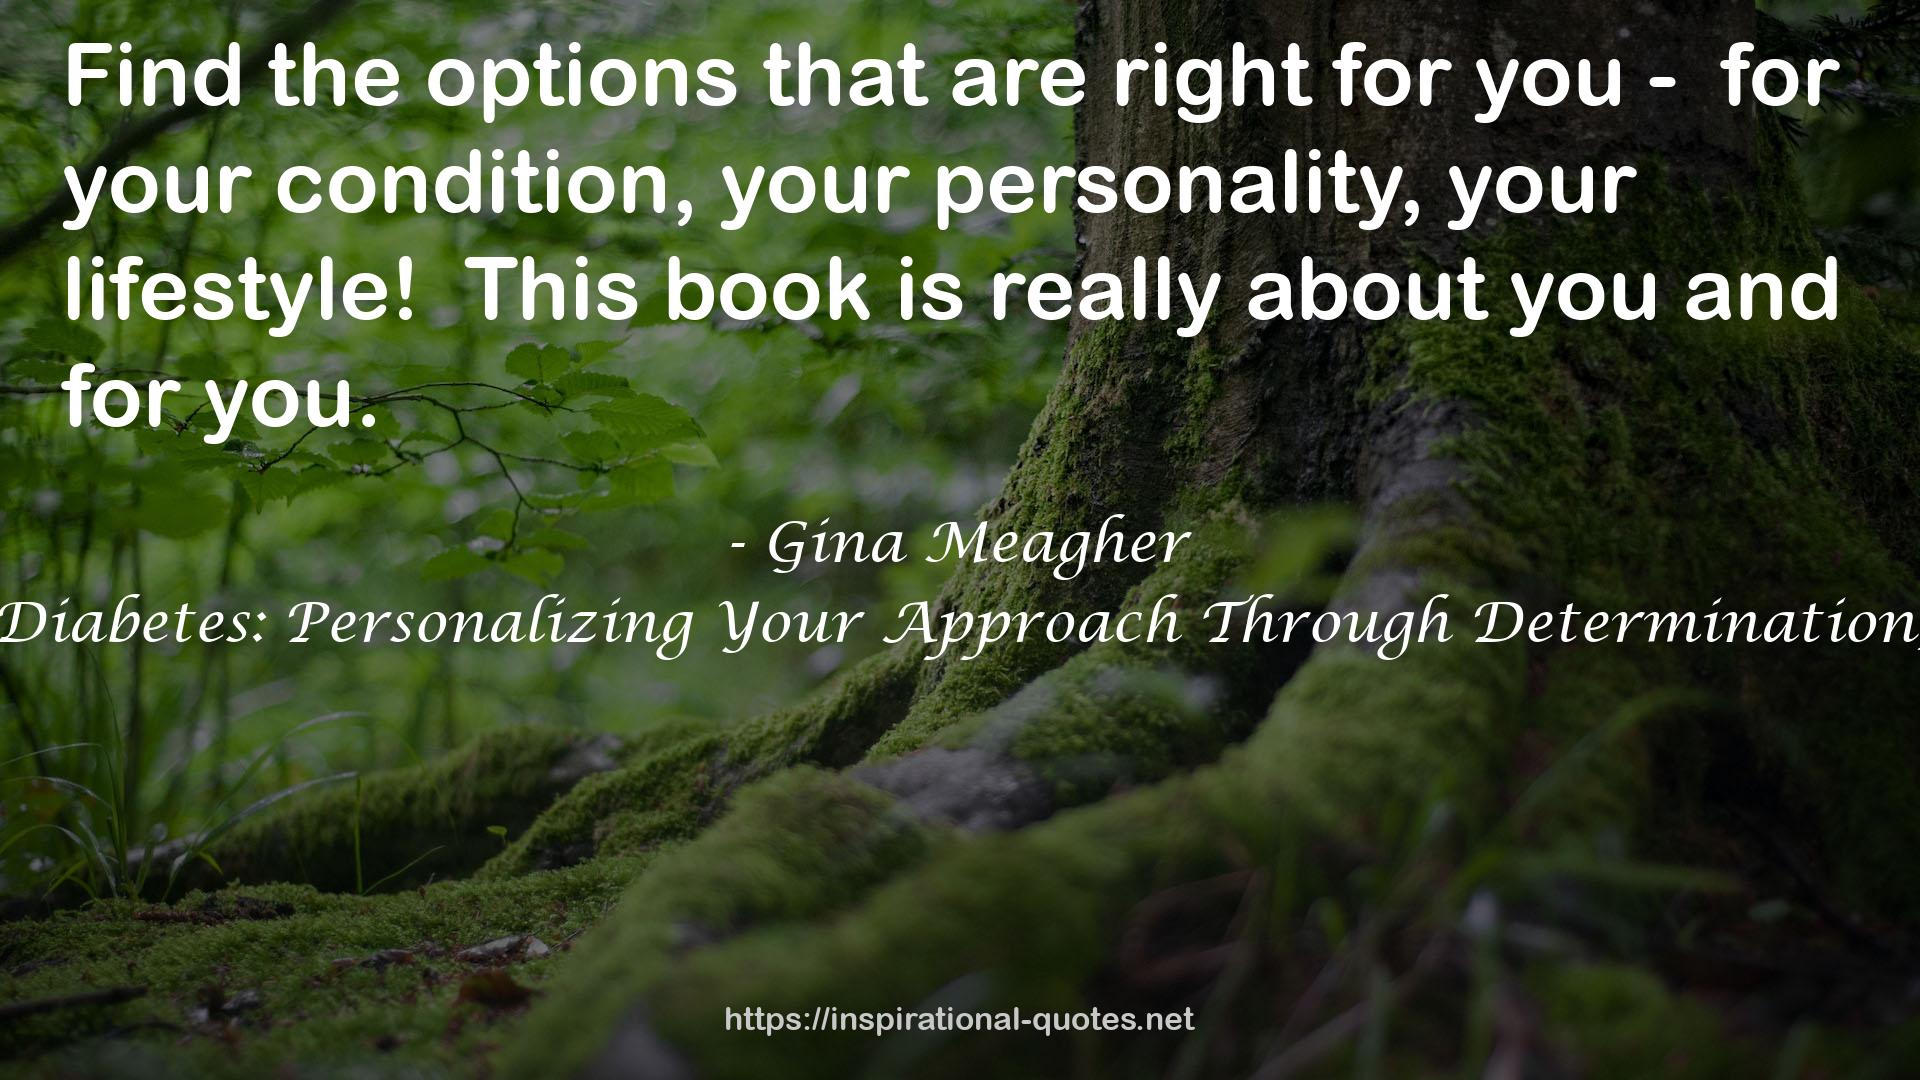 Gina Meagher QUOTES